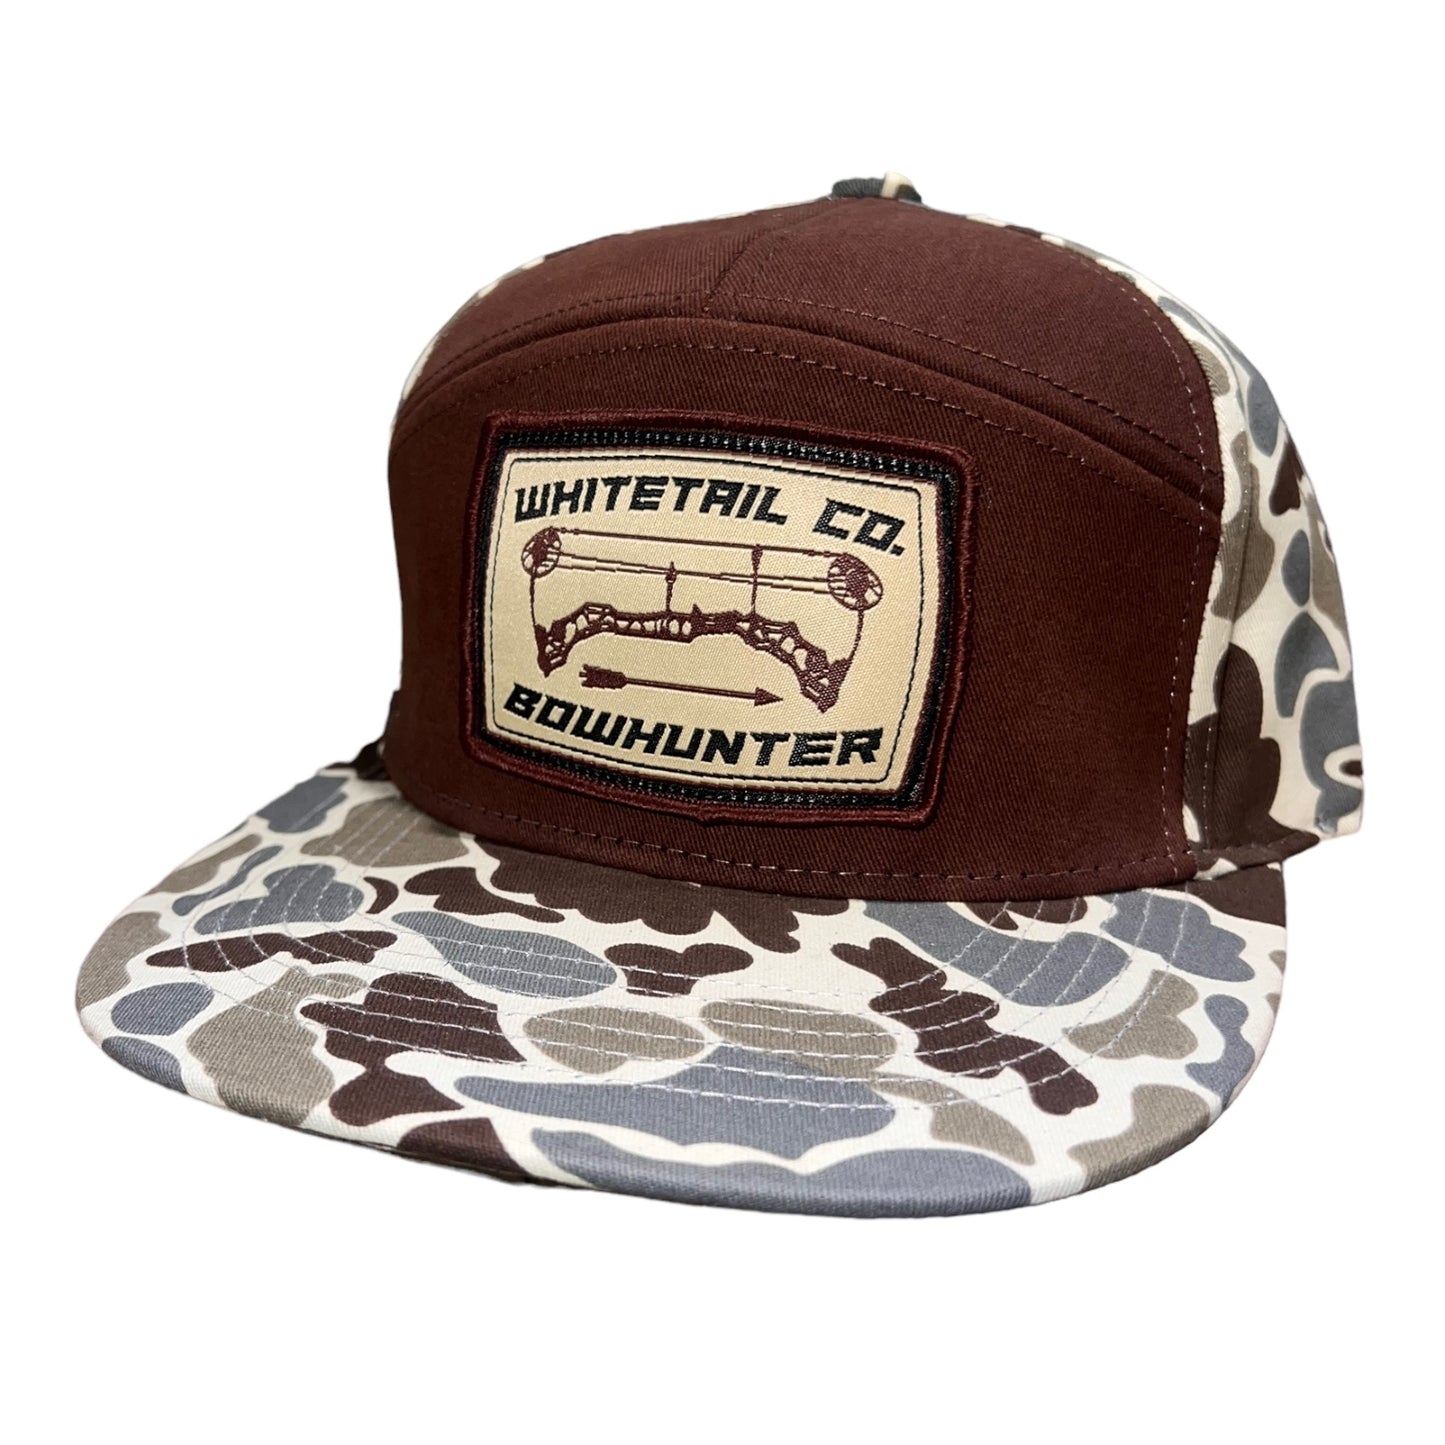 Whitetail Co. Bowhunter Old School Camo 7 Panel